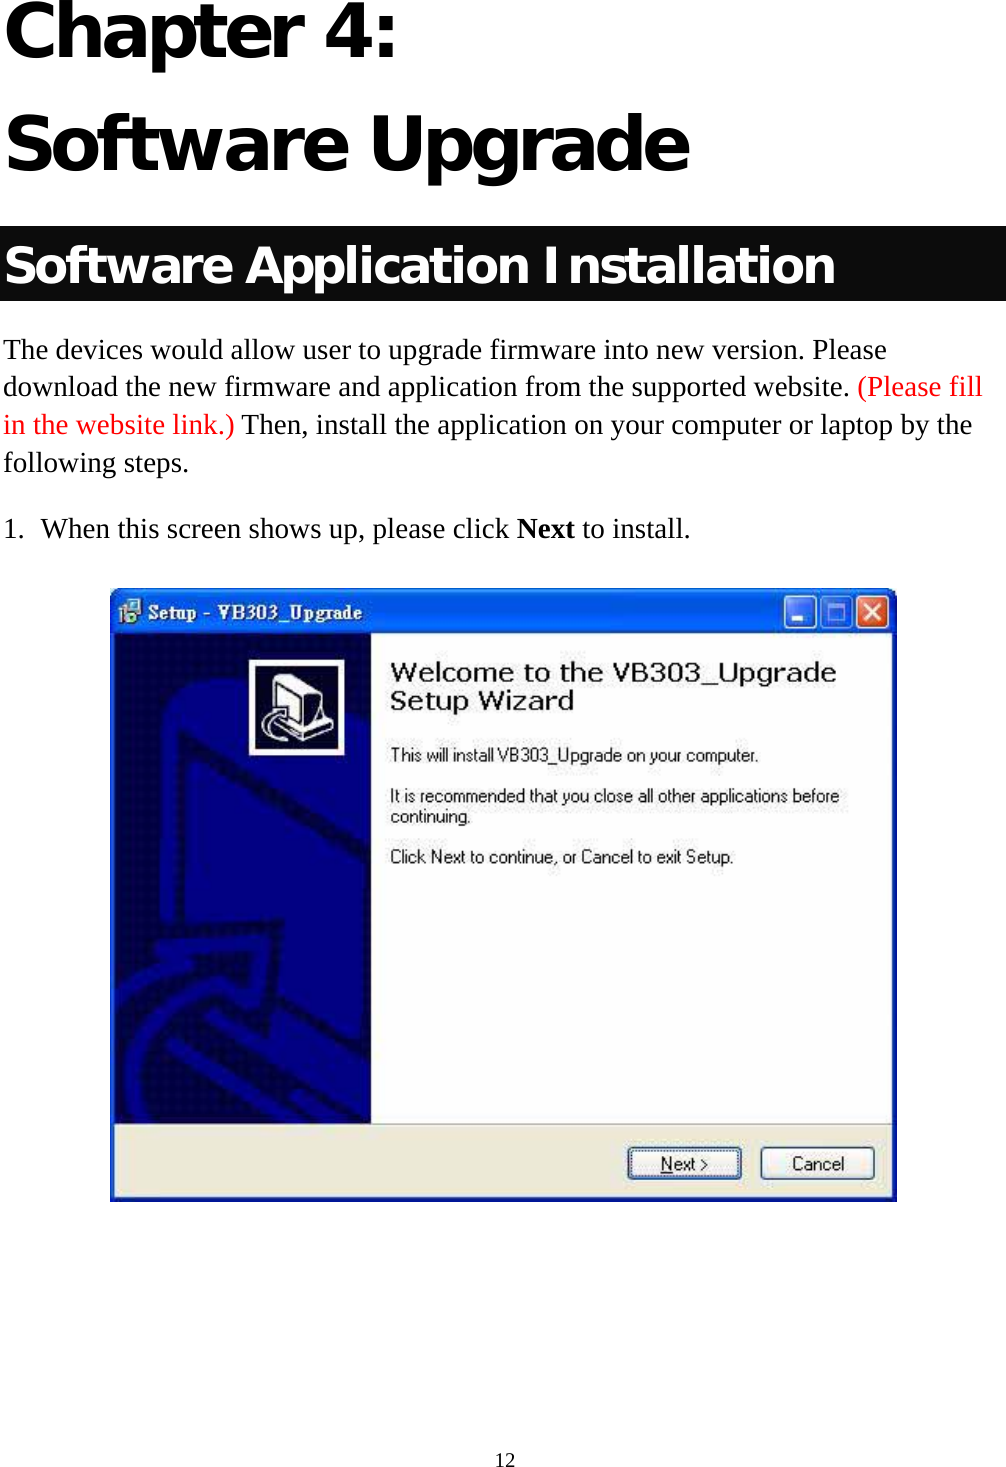  12Chapter 4: Software Upgrade Software Application Installation The devices would allow user to upgrade firmware into new version. Please download the new firmware and application from the supported website. (Please fill in the website link.) Then, install the application on your computer or laptop by the following steps. 1. When this screen shows up, please click Next to install.  